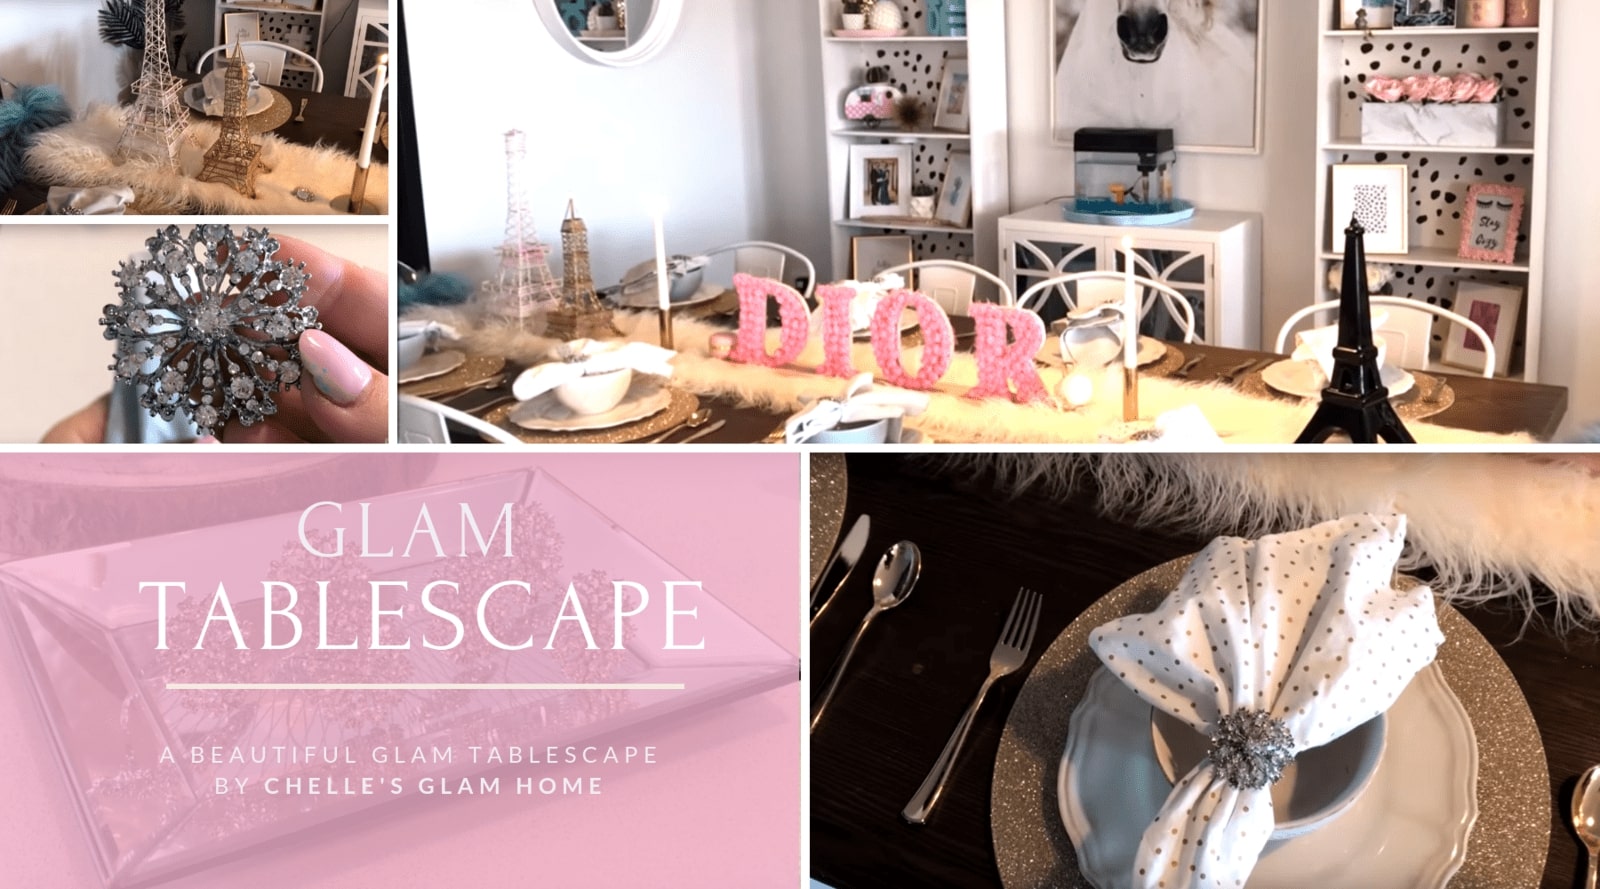 Glam Tablescape by Chelle's Glam Home